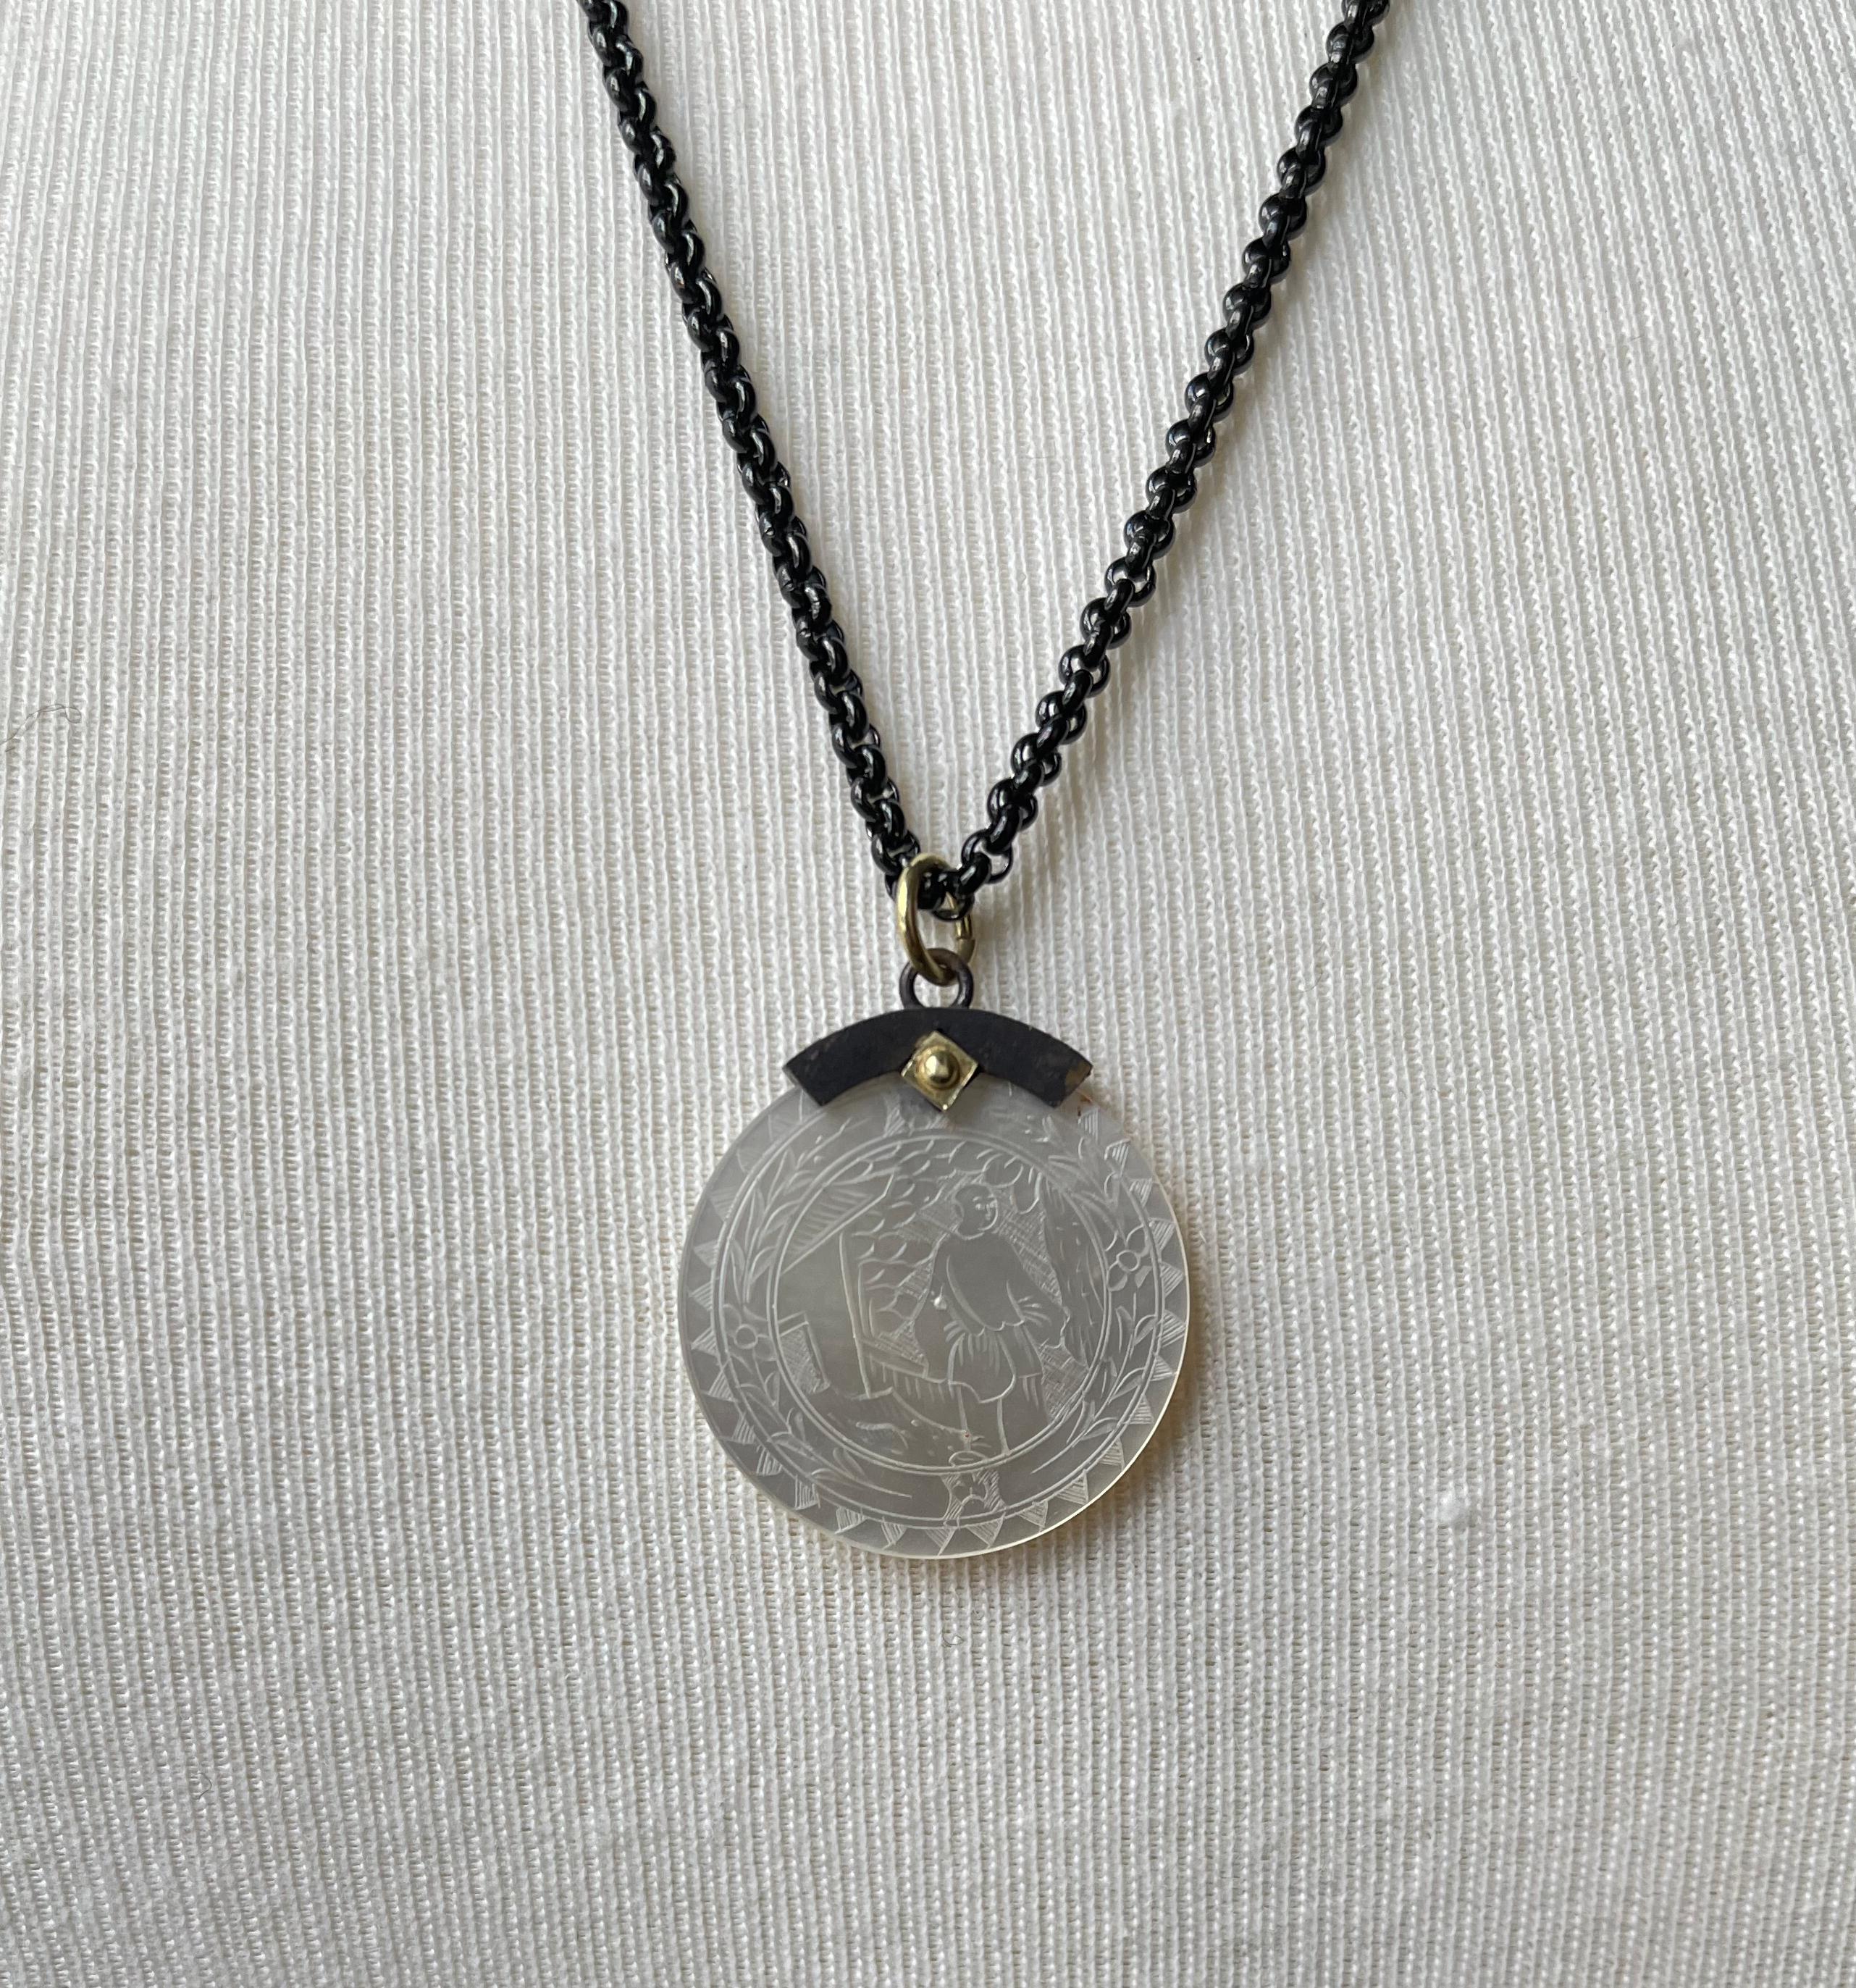 Antique Engraved Mother-of-Pearl Pendant with Gold, Silver and Blackened Steel For Sale 3